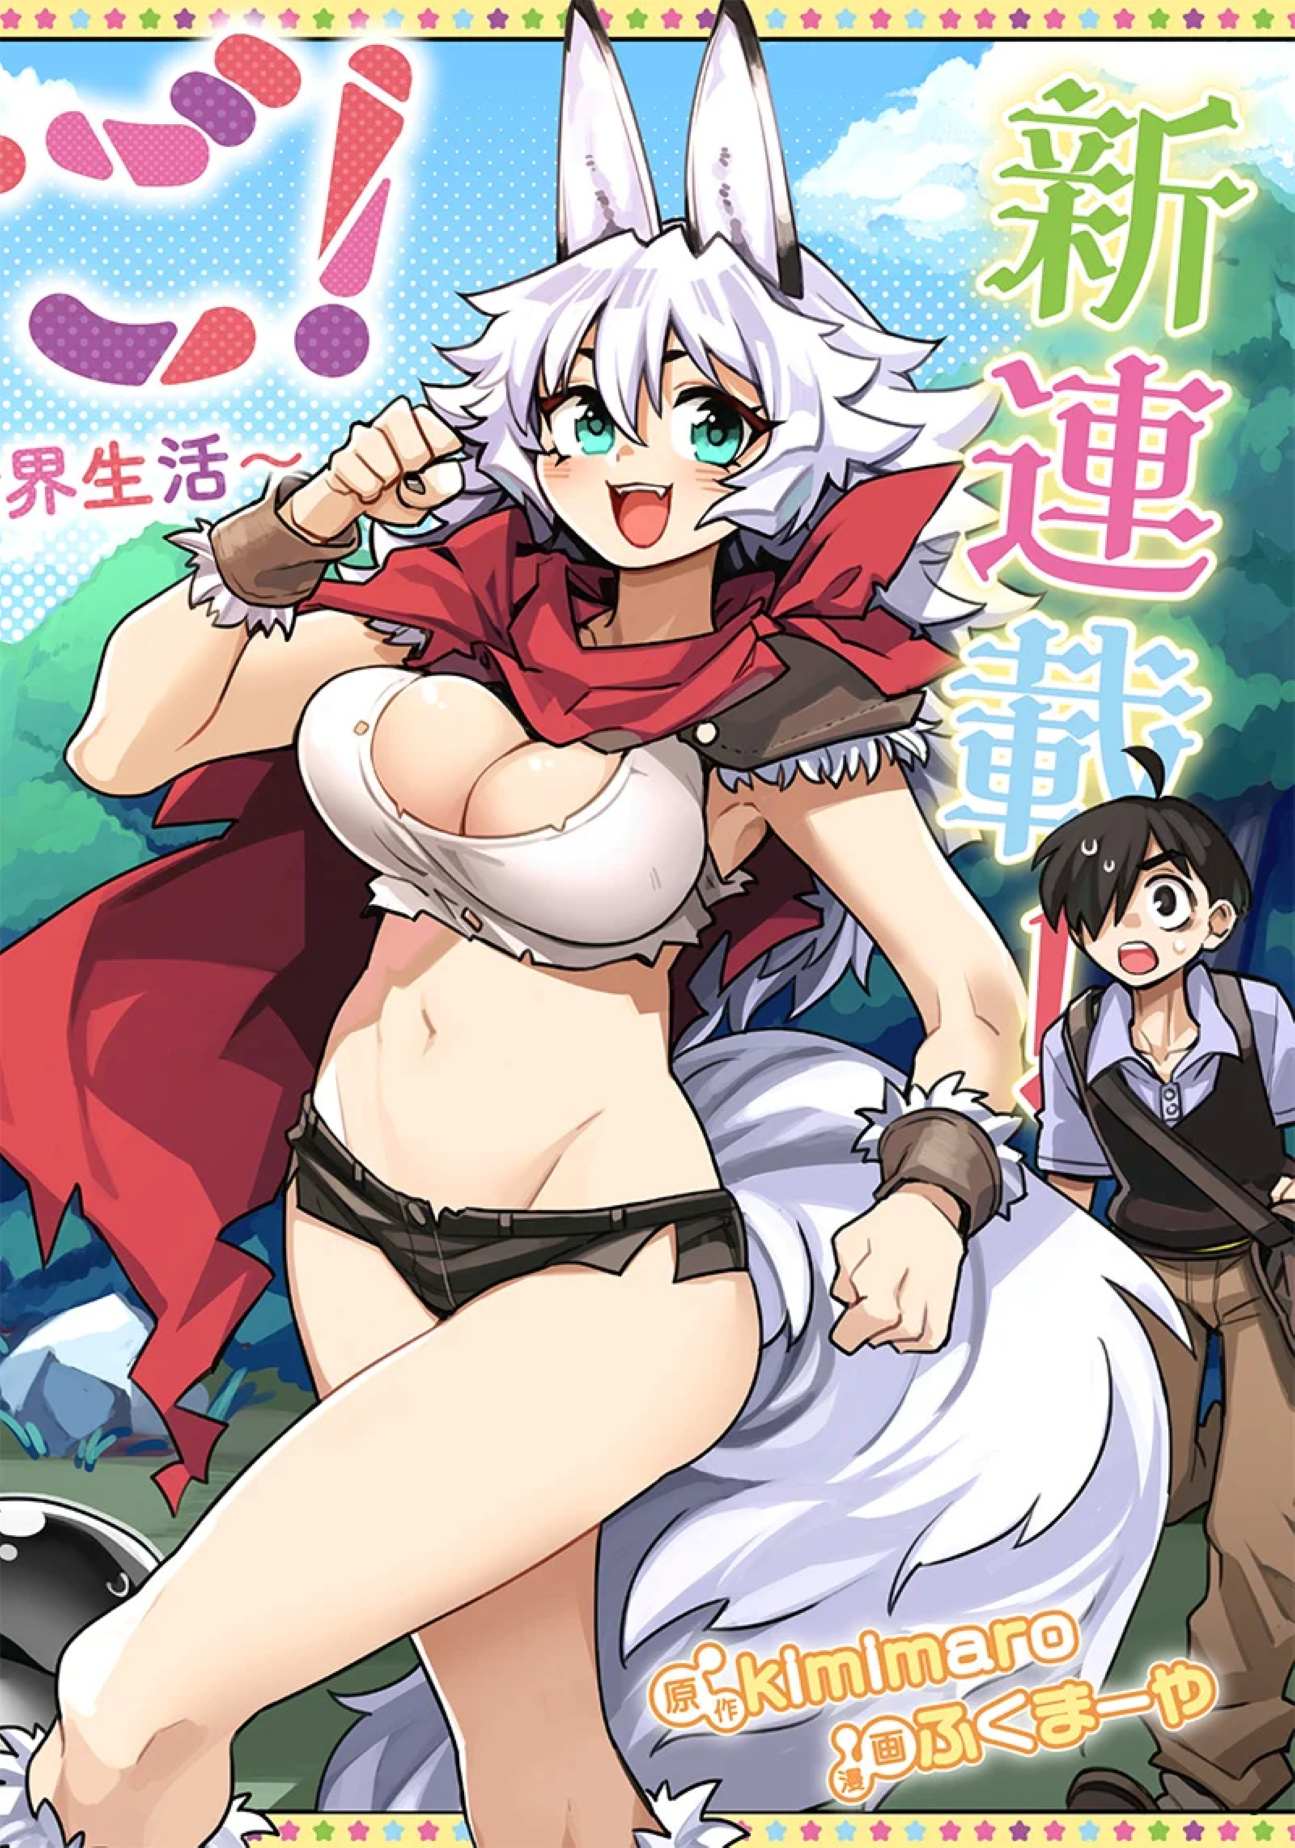 Monmusugo! 〜Living In Another World With The Strongest Monster Girls With Translation Skills〜 - chapter 5.1 - #3